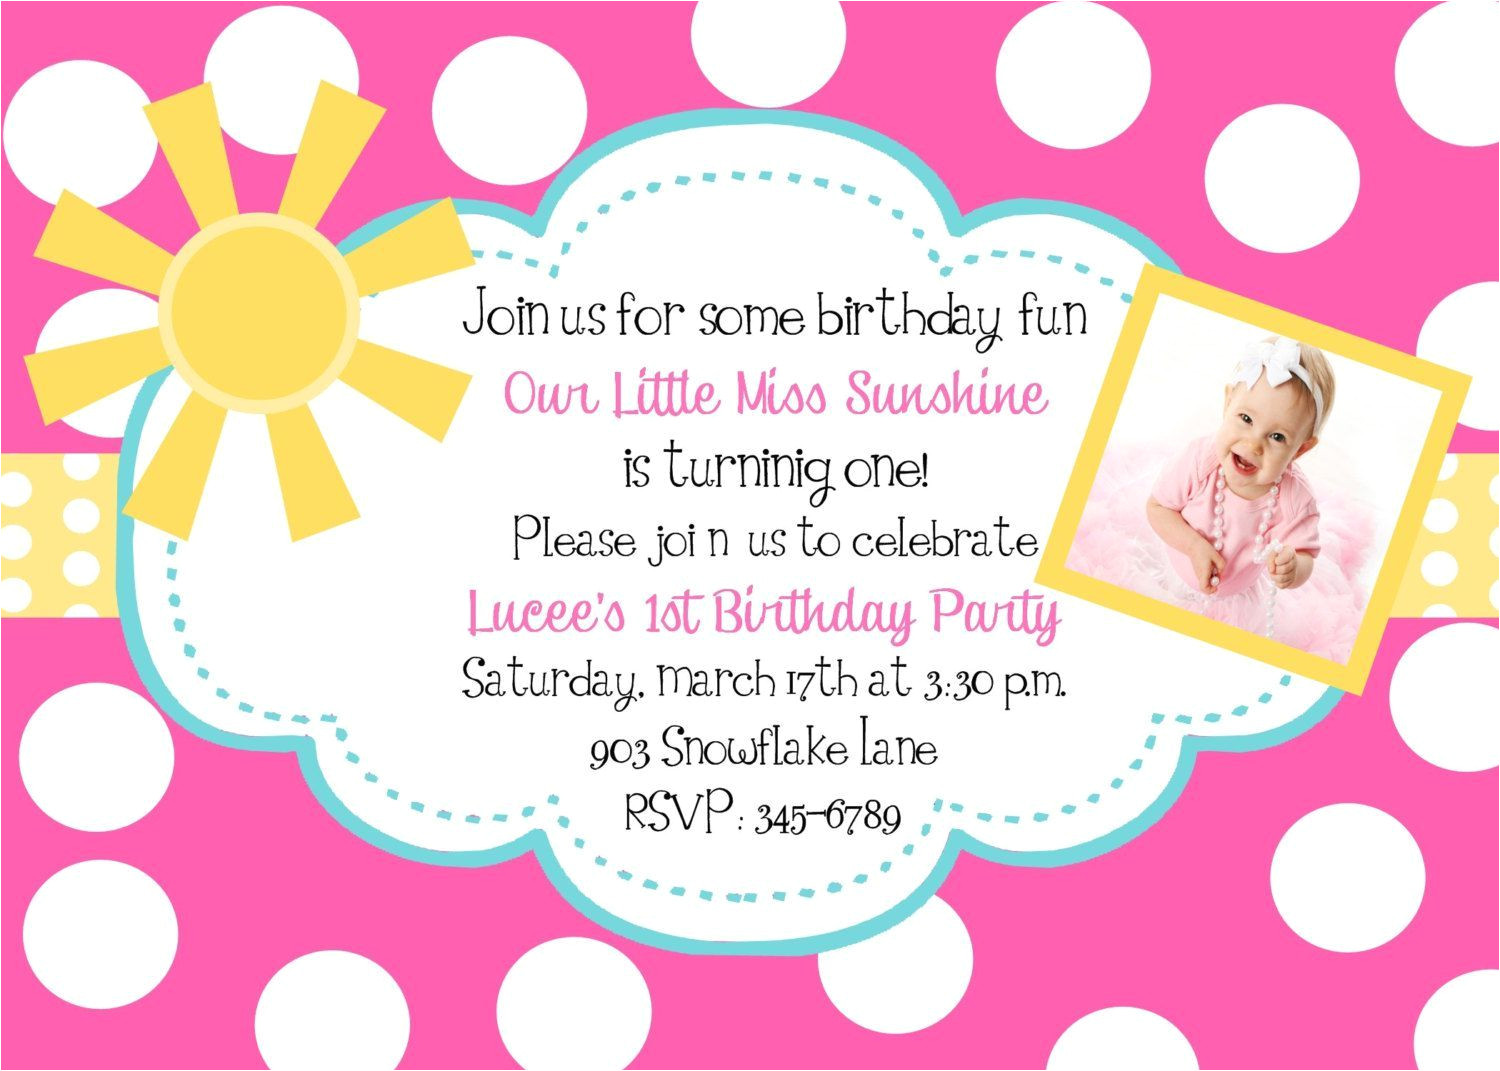 Party Invitation Message Template Birthday Invitation Wording for 3 Year Old Birthday